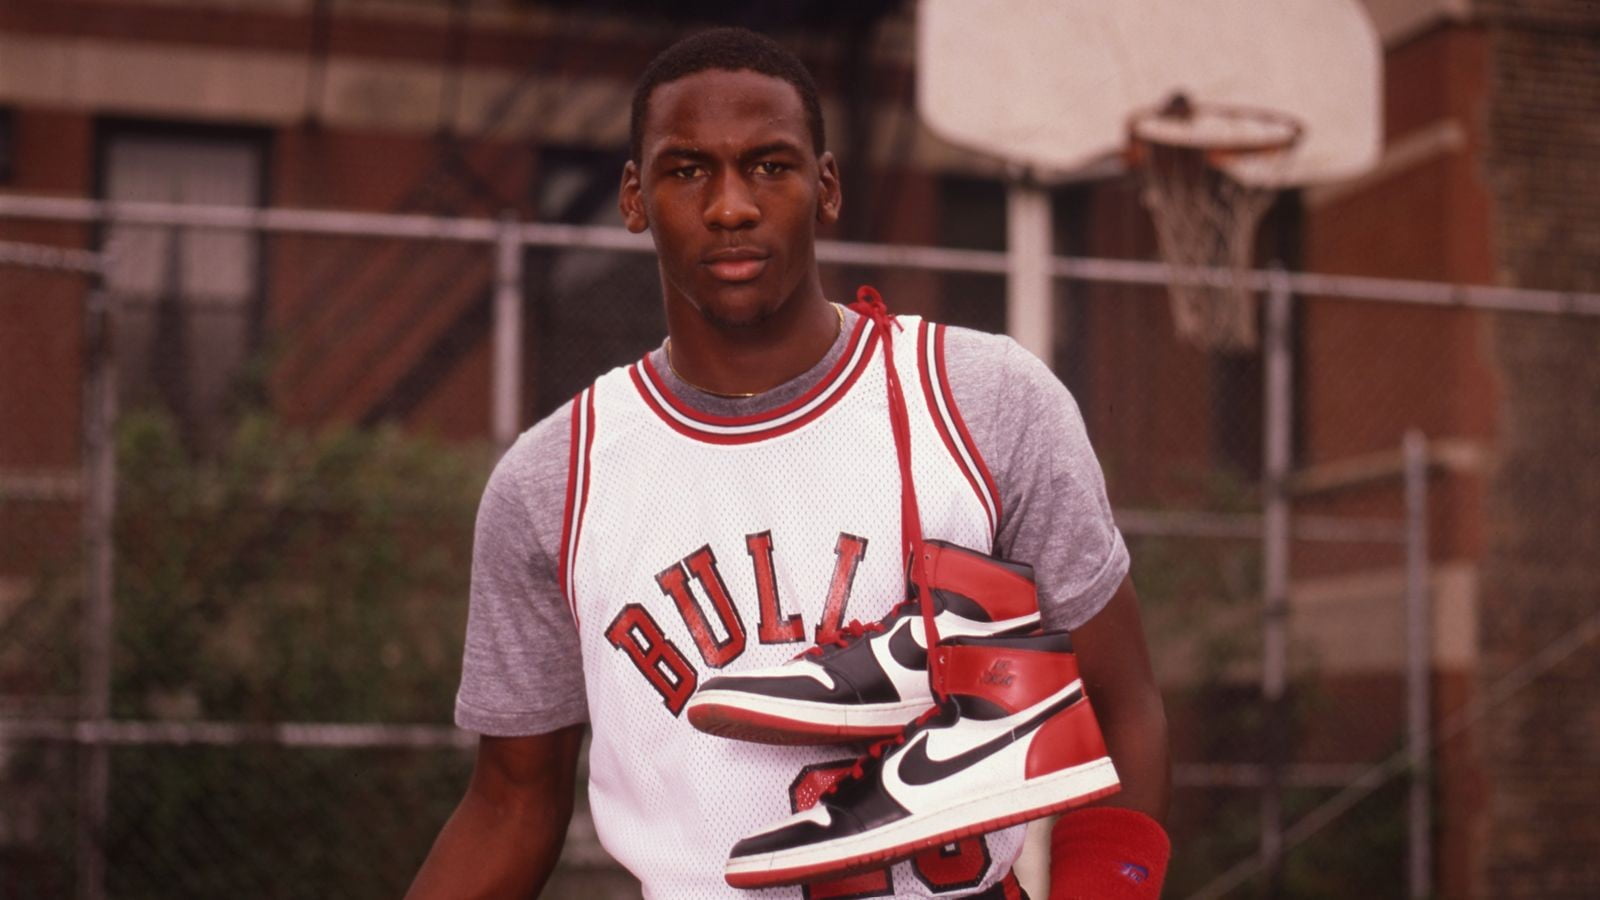 Man In White And Red Chicago Bulls Jersey Shirt With Pair Of White-And-Red  Air Jordan 1 Shoes On Hanging On Shoulder Hd Wallpaper | Wallpaper Flare